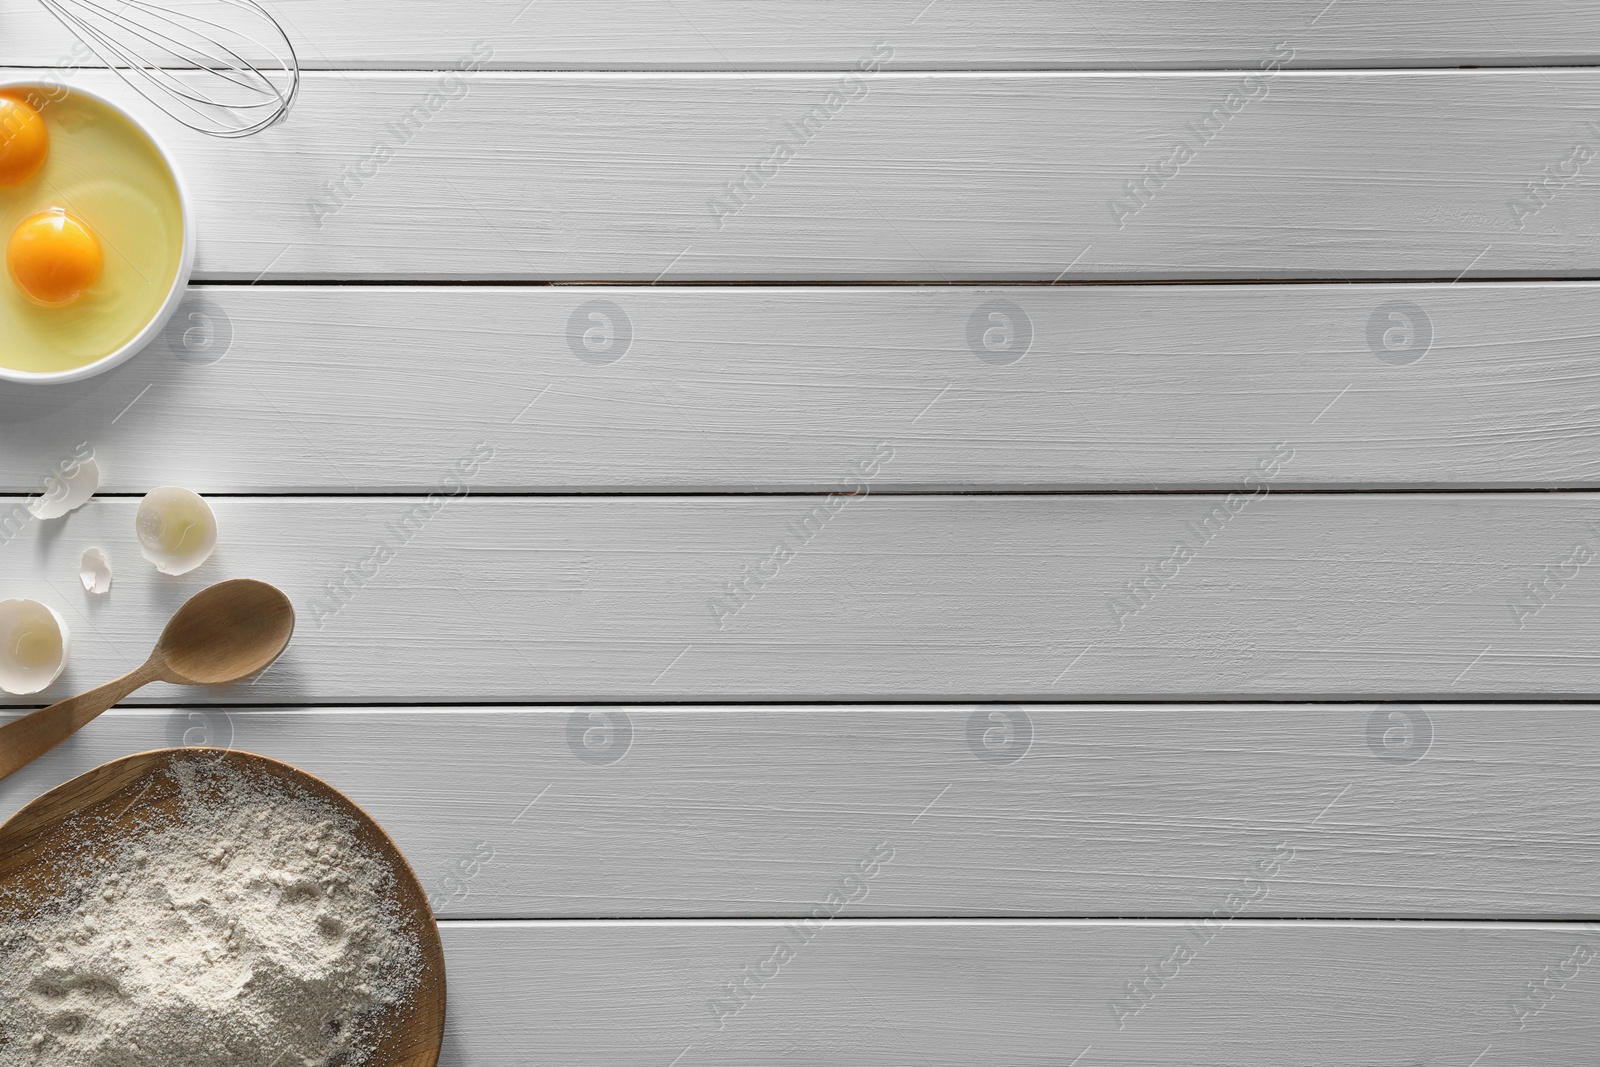 Photo of Food photography. Yolks, eggshell, spoon, flour and whisk on white wooden table, flat lay with space for text